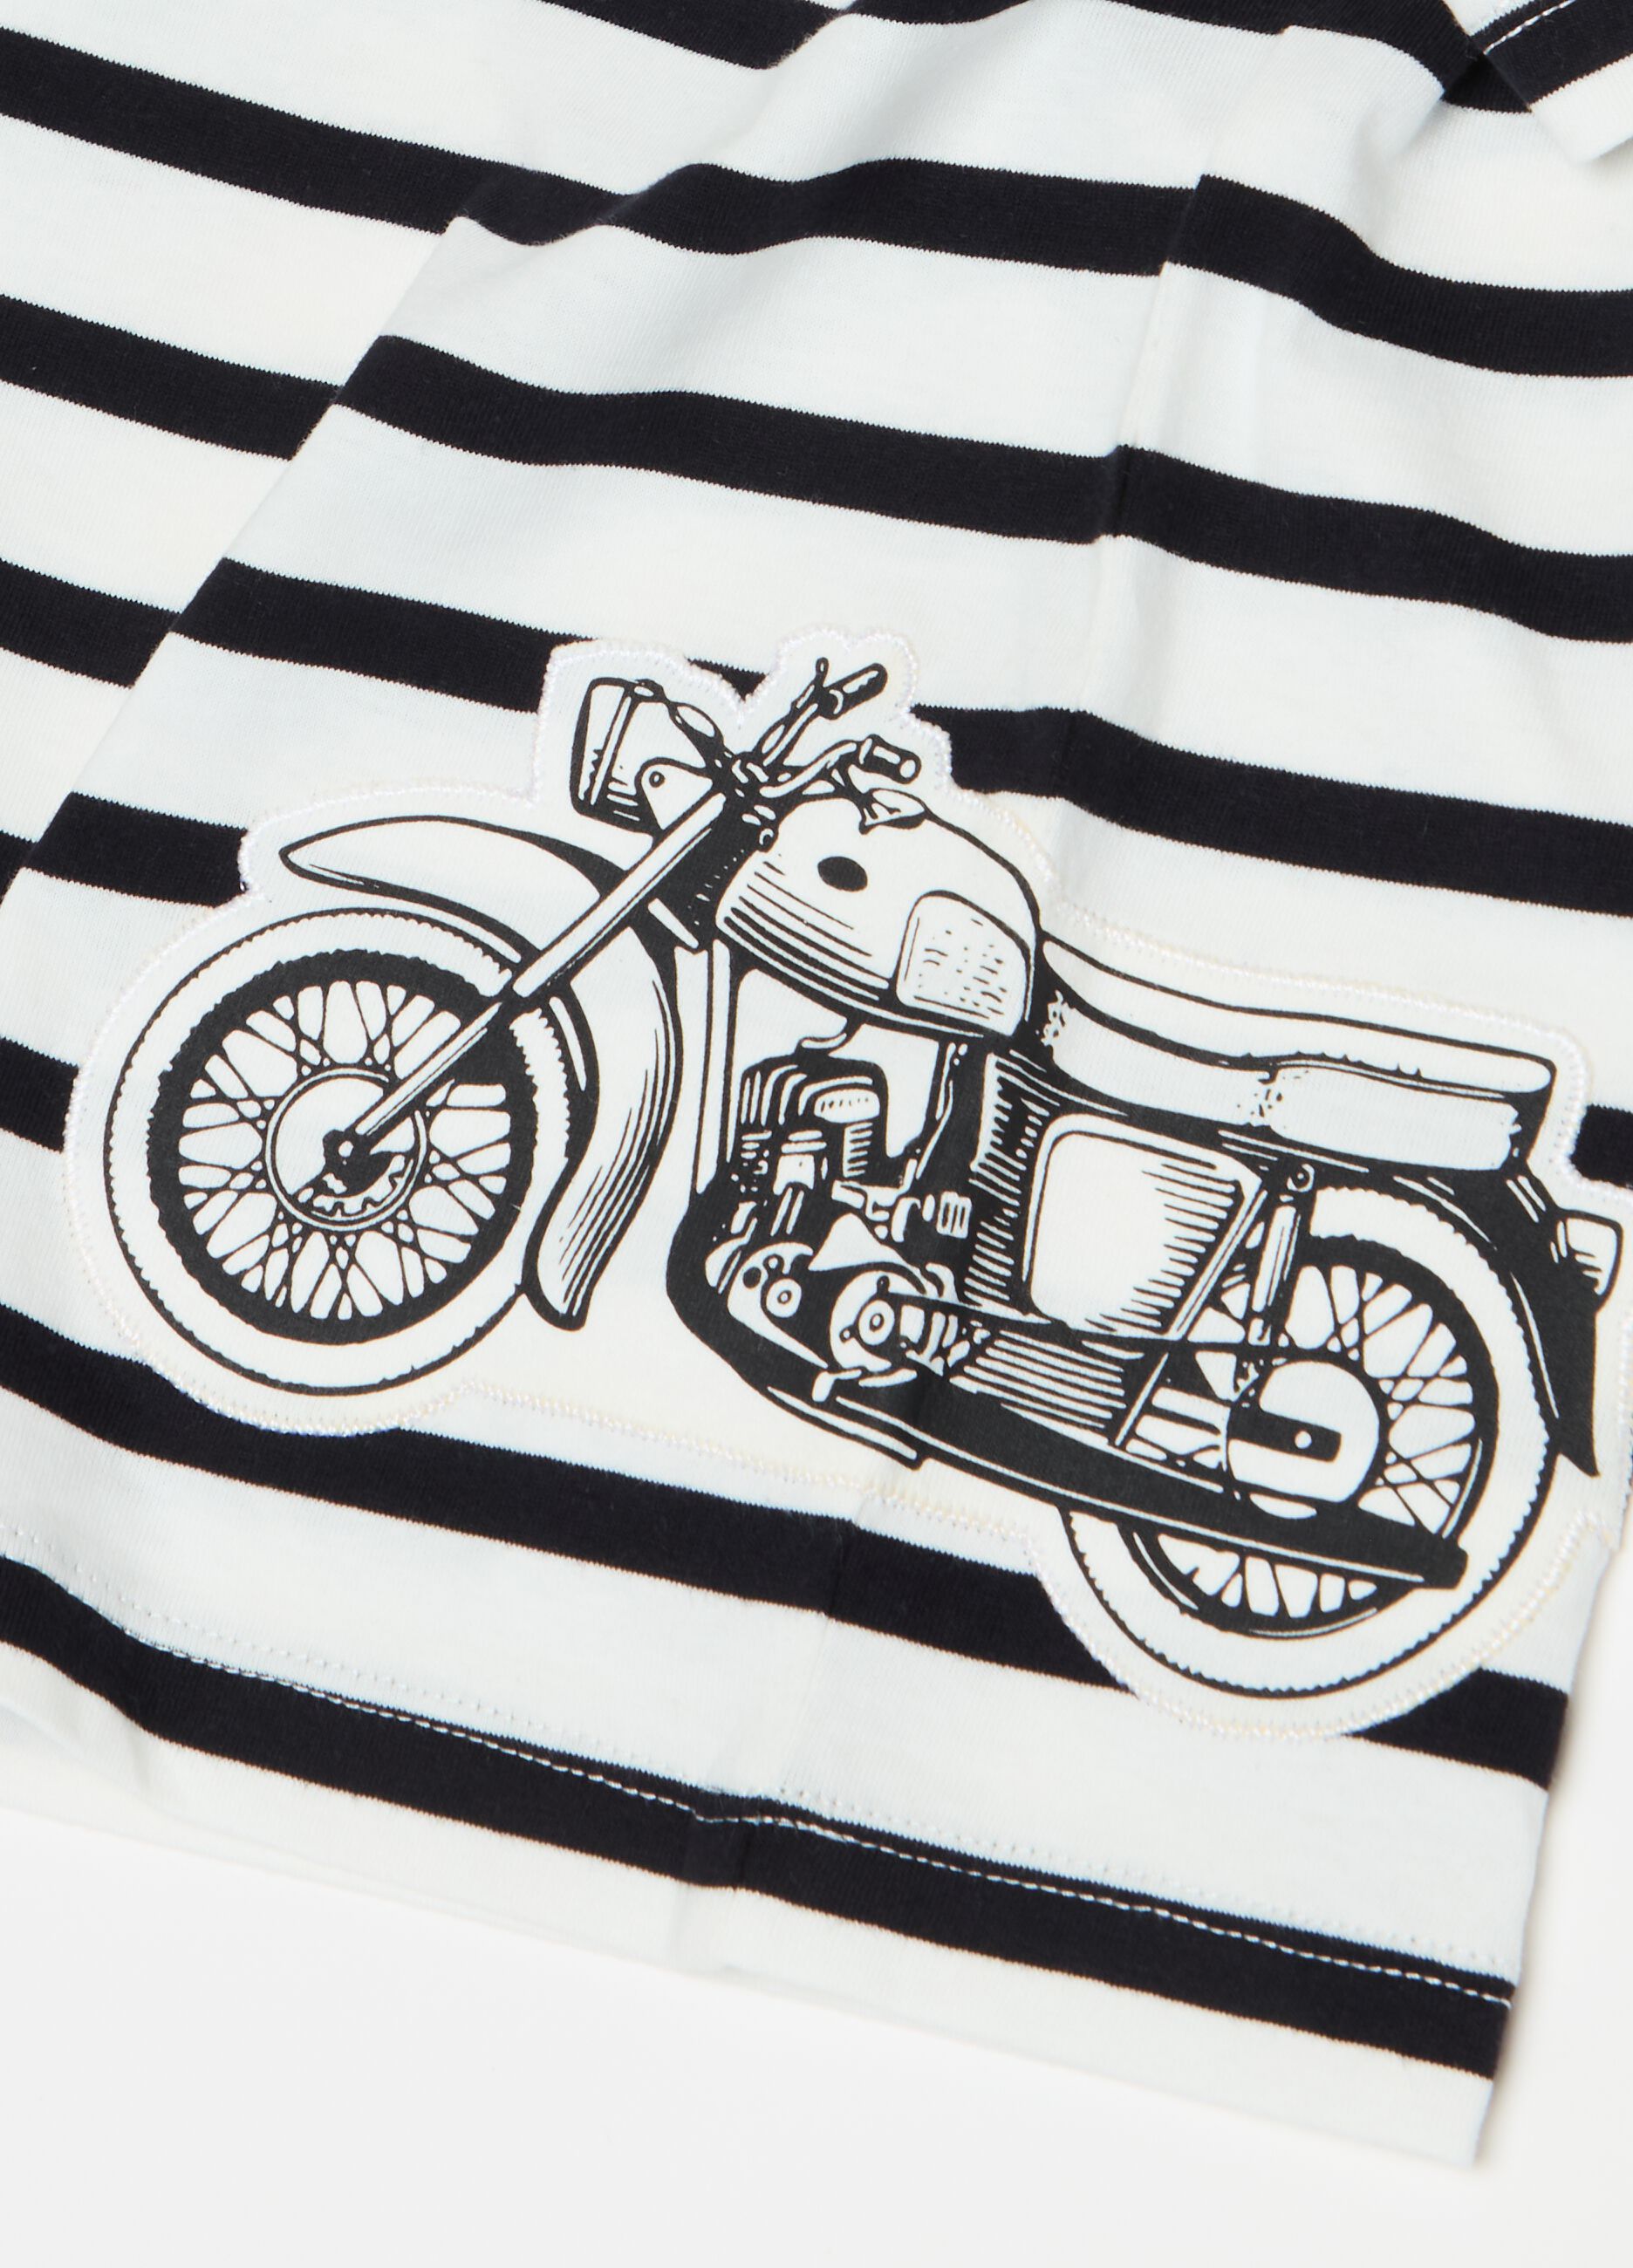 Striped cotton T-shirt with patches